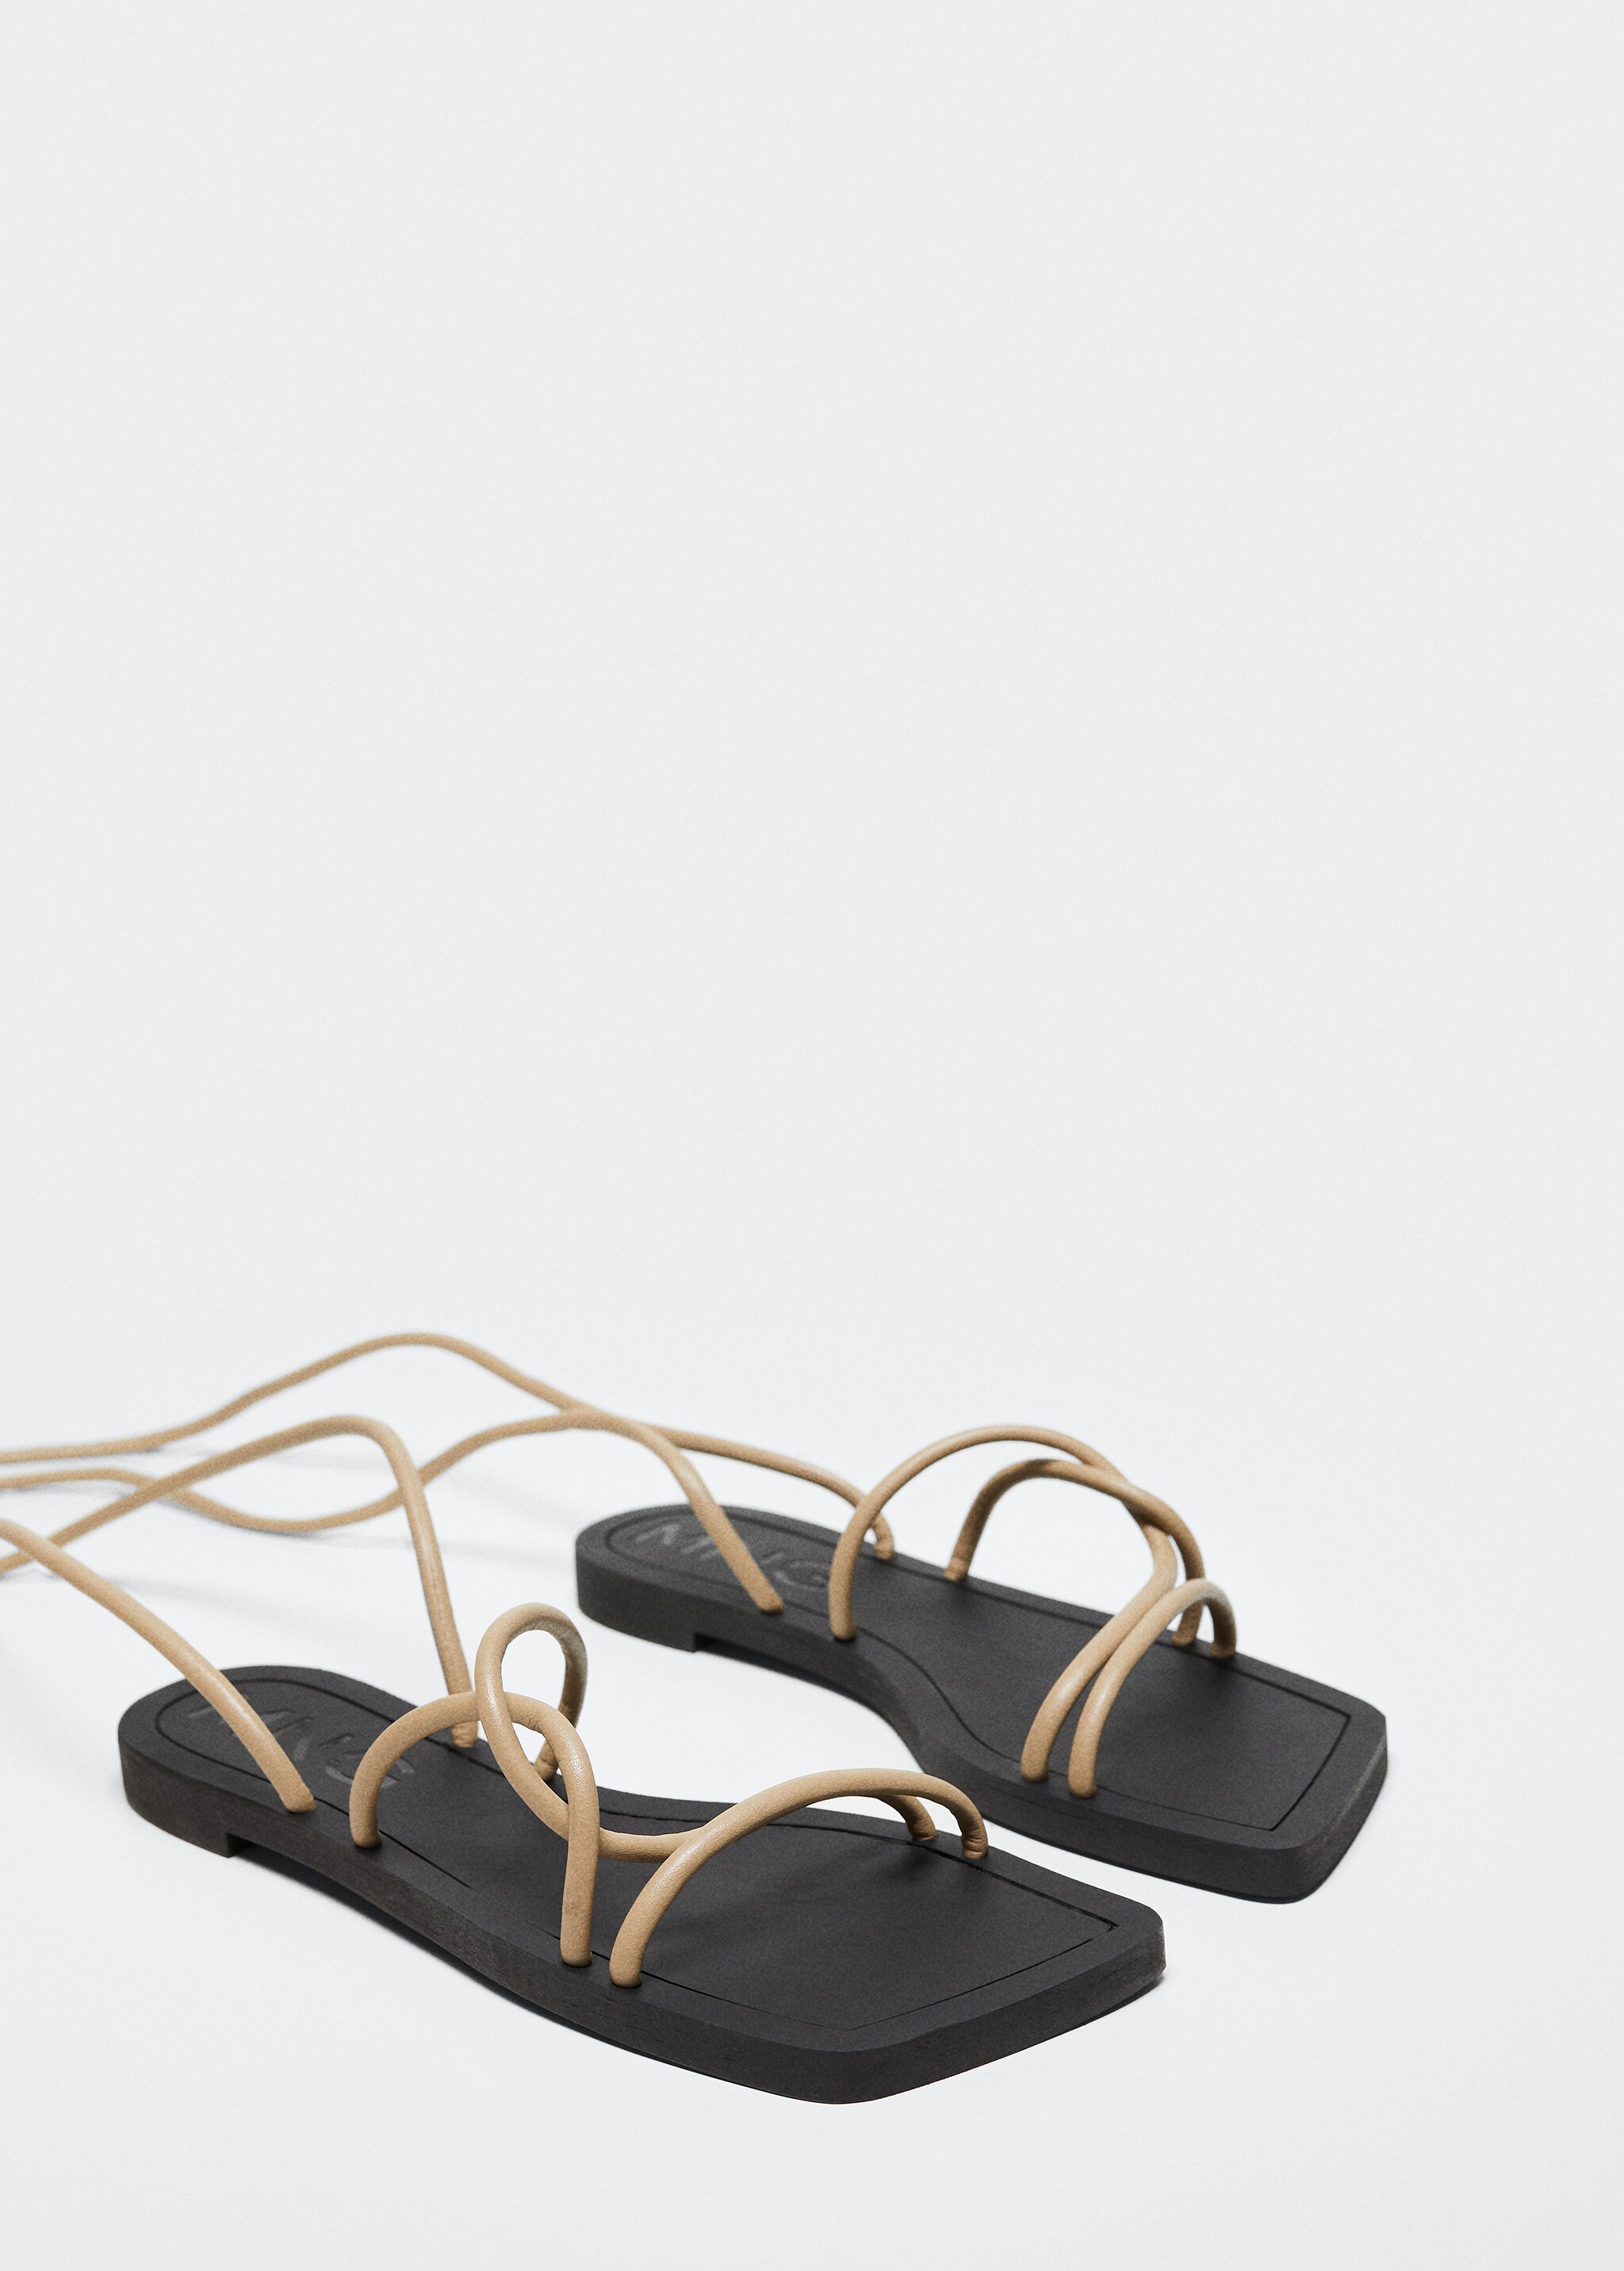 Criss-cross straps sandals - Details of the article 3